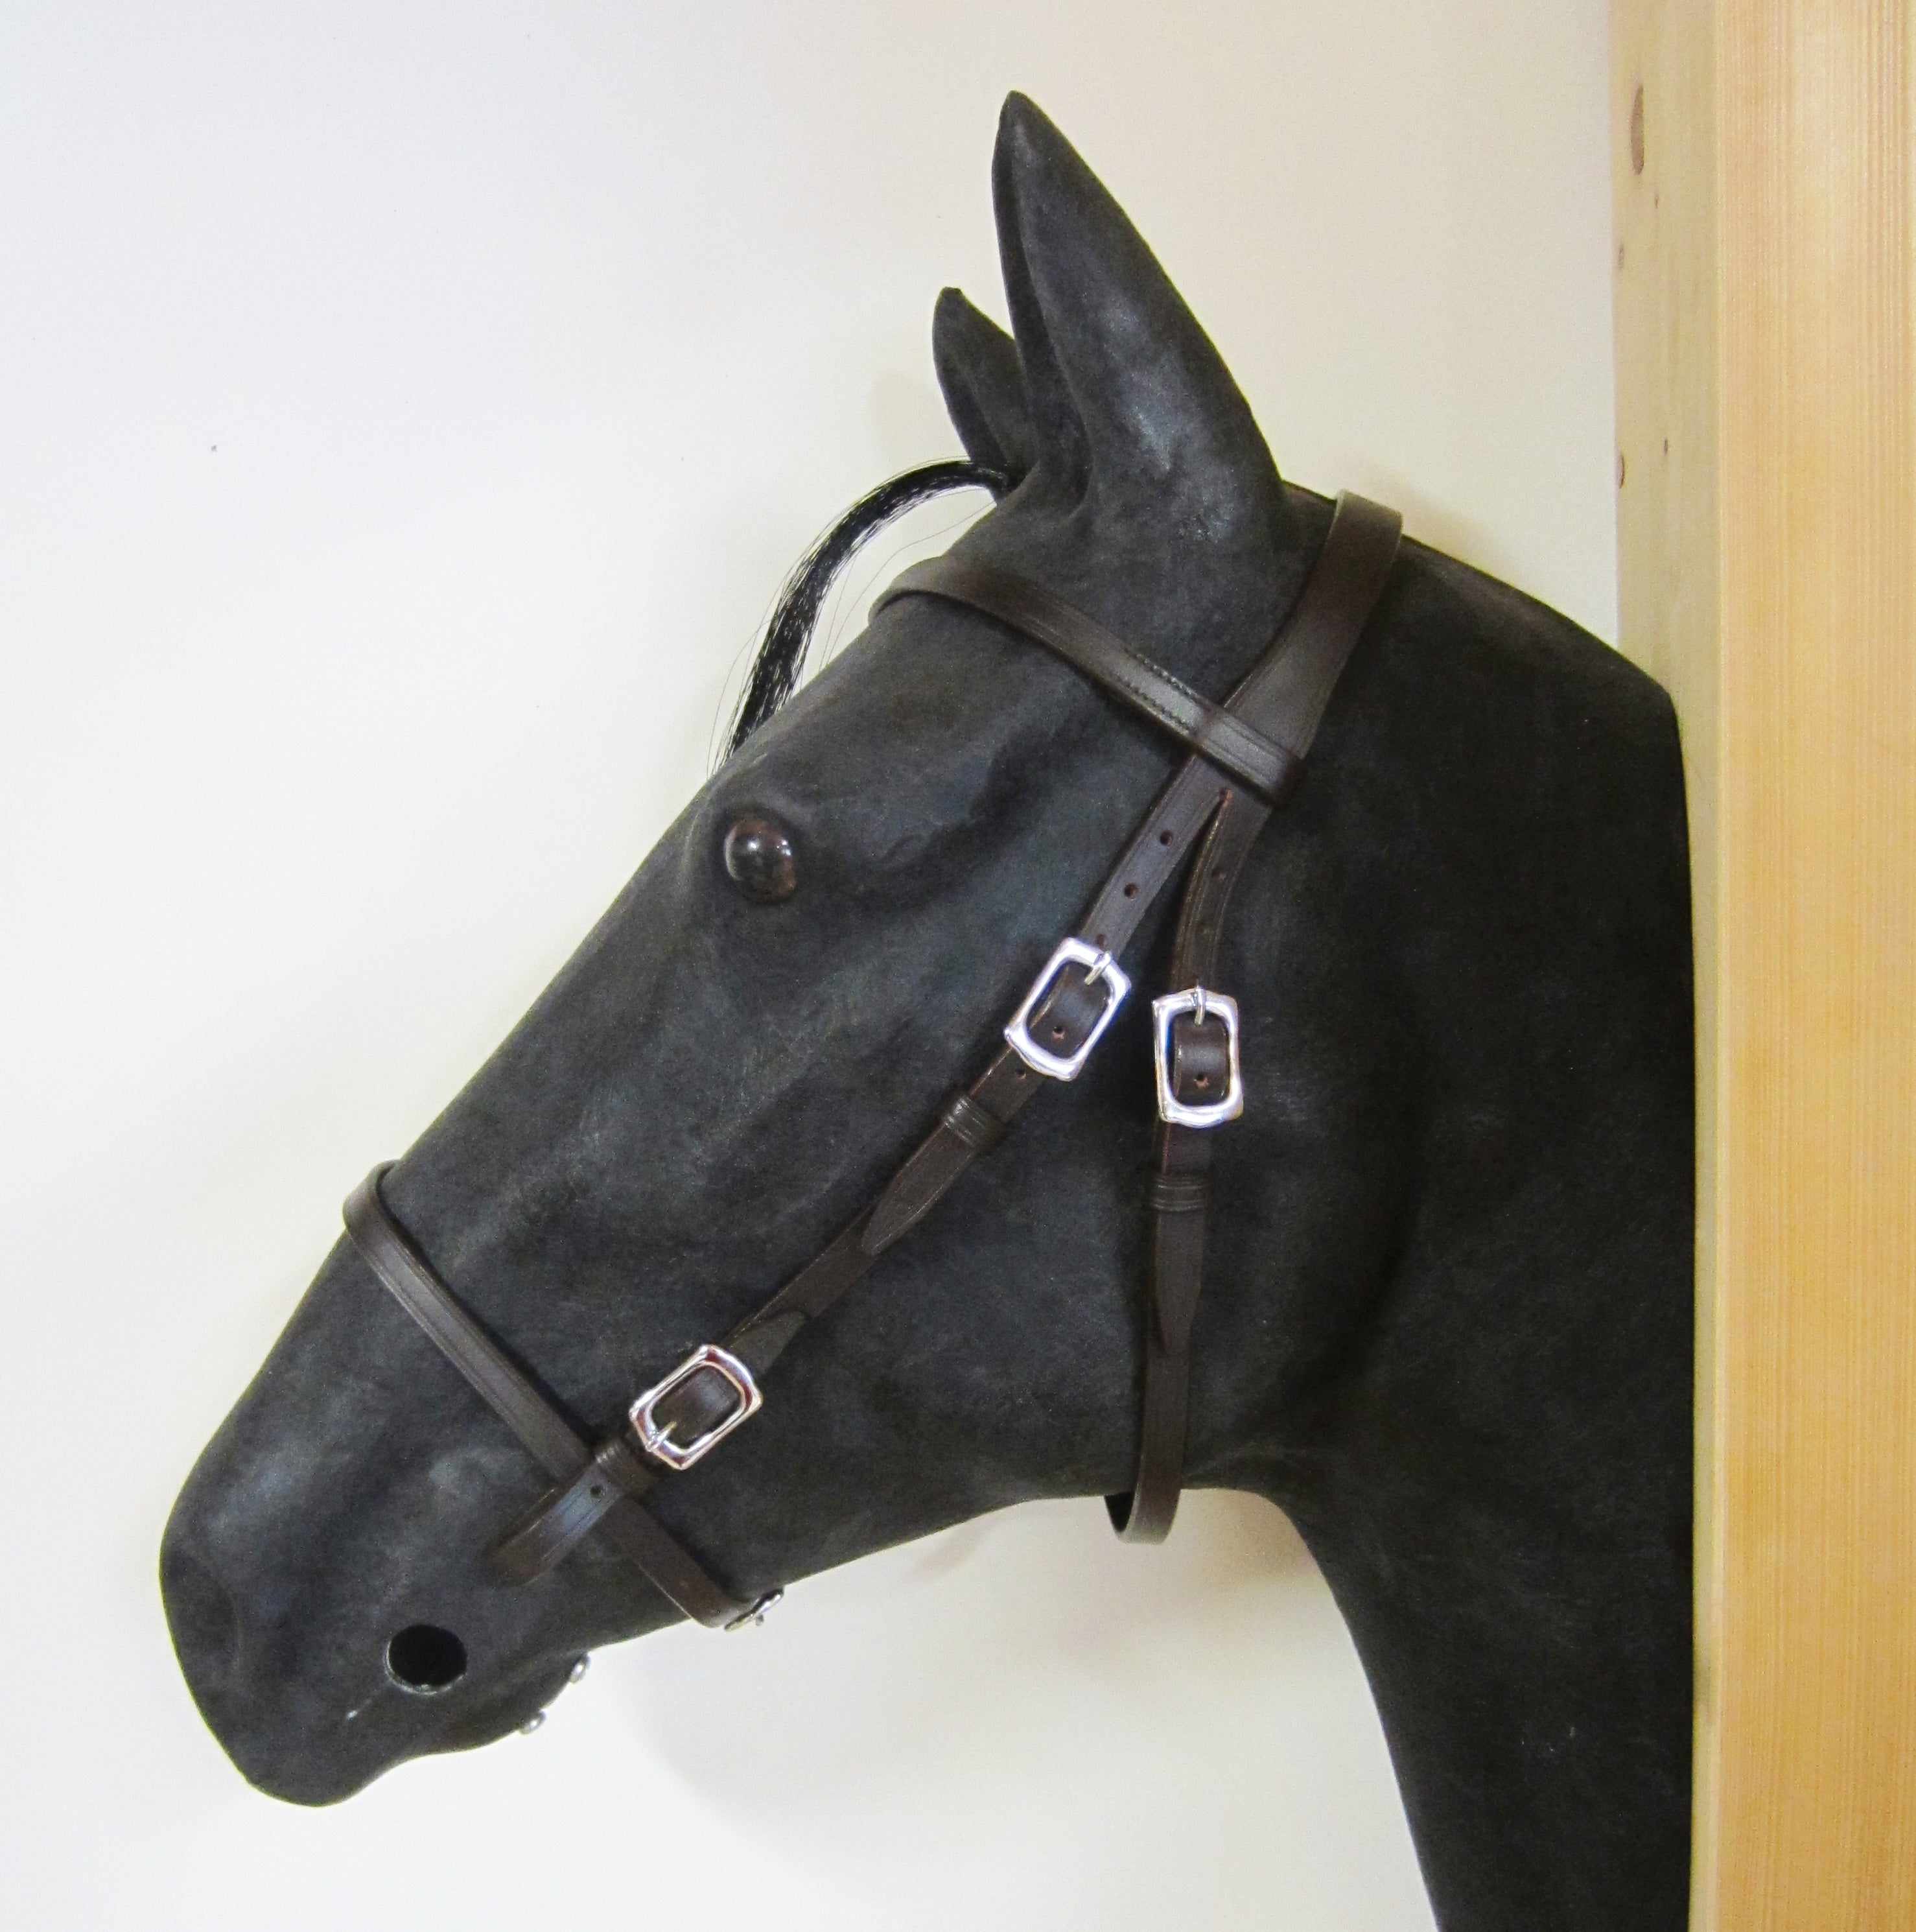 Baroque bridle "Aventar" with freedom of ears - unique pieces - B-STOCK!